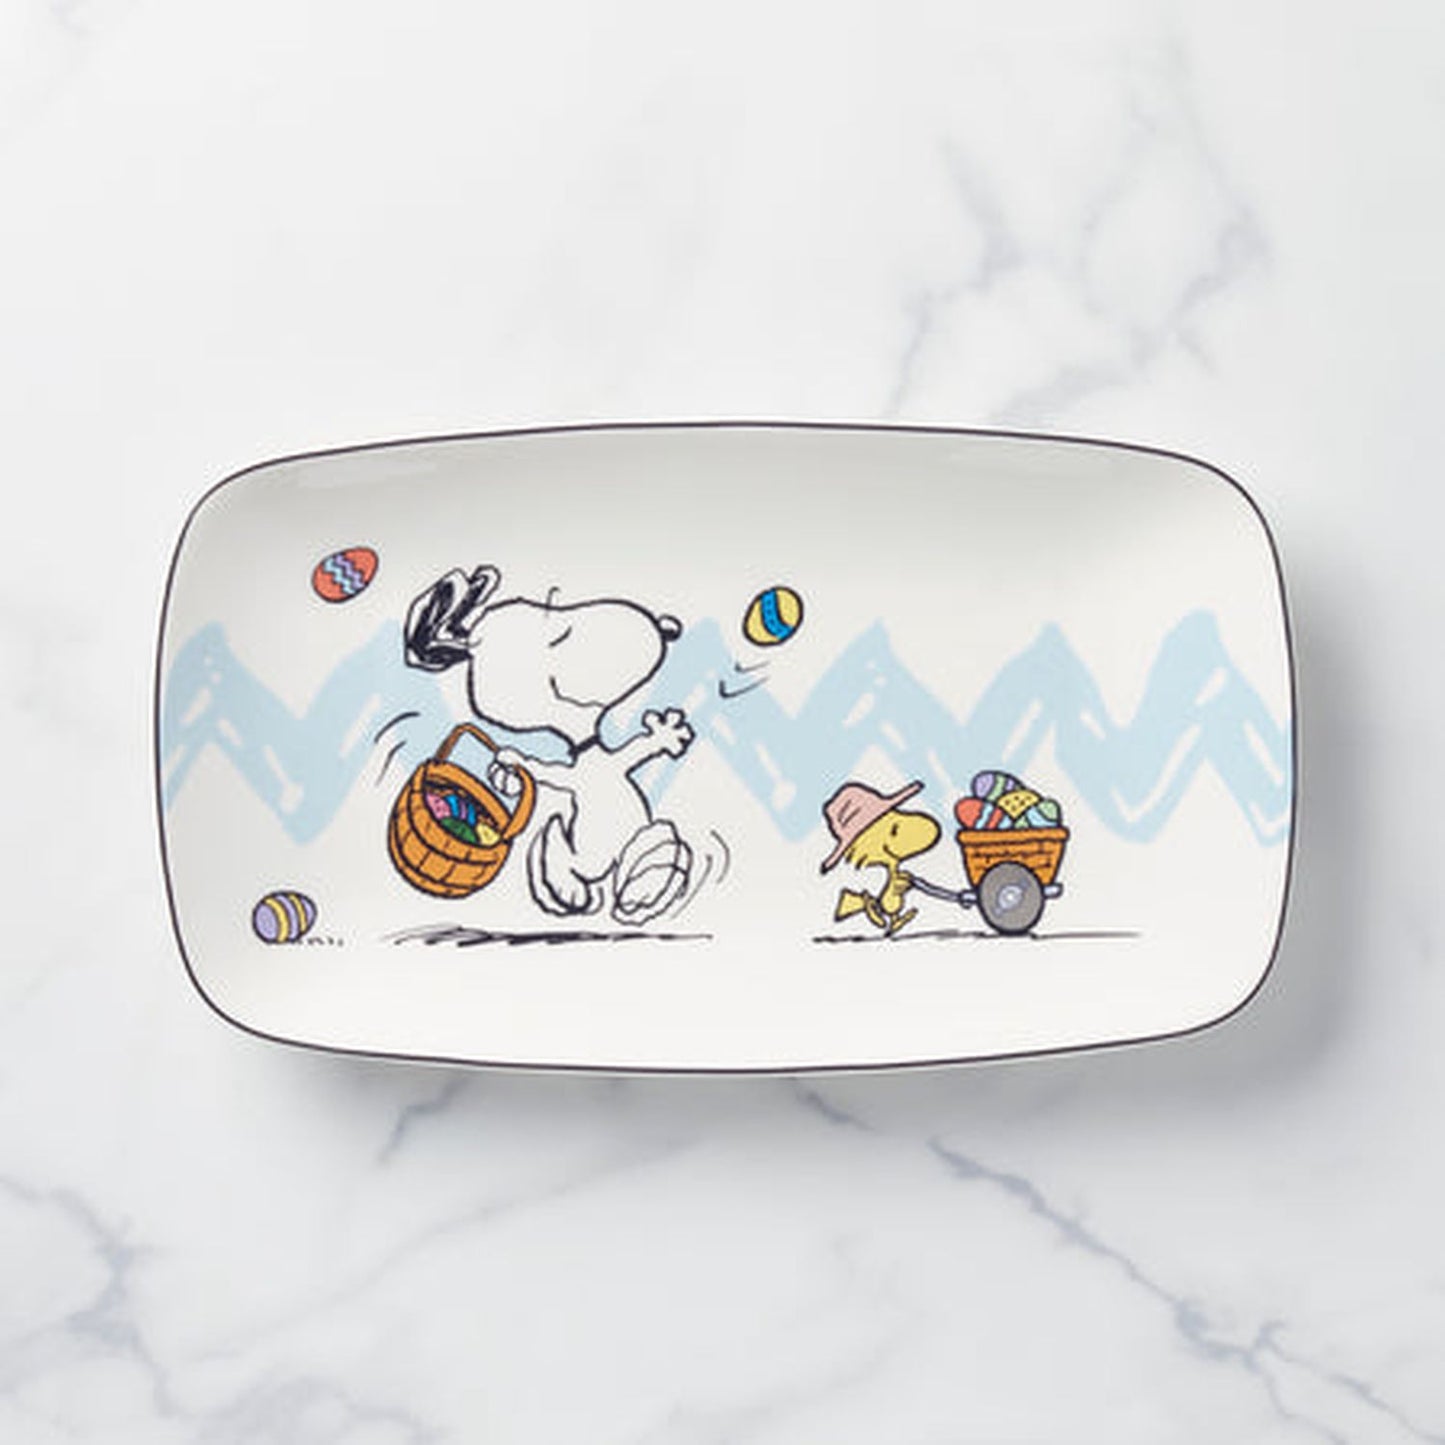 Lenox Peanuts Snoopy 13.75" Easter Hors D'Ouevres Tray, Ivory, Porcelain